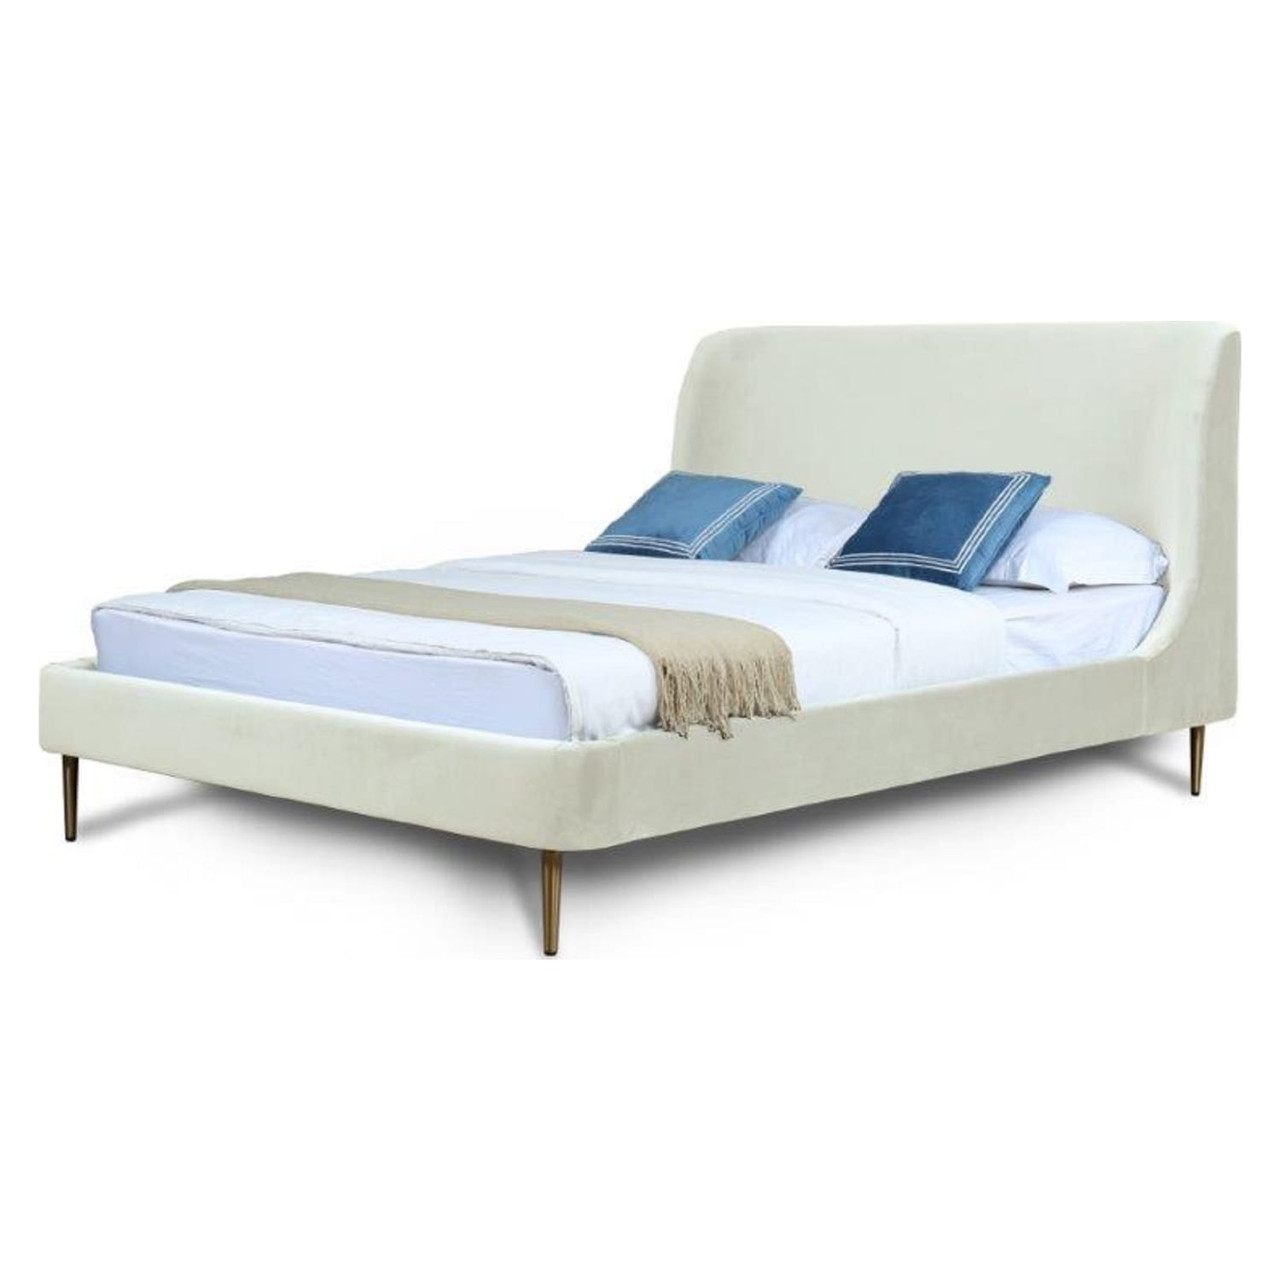 Heather Full-Size Bed in Cream